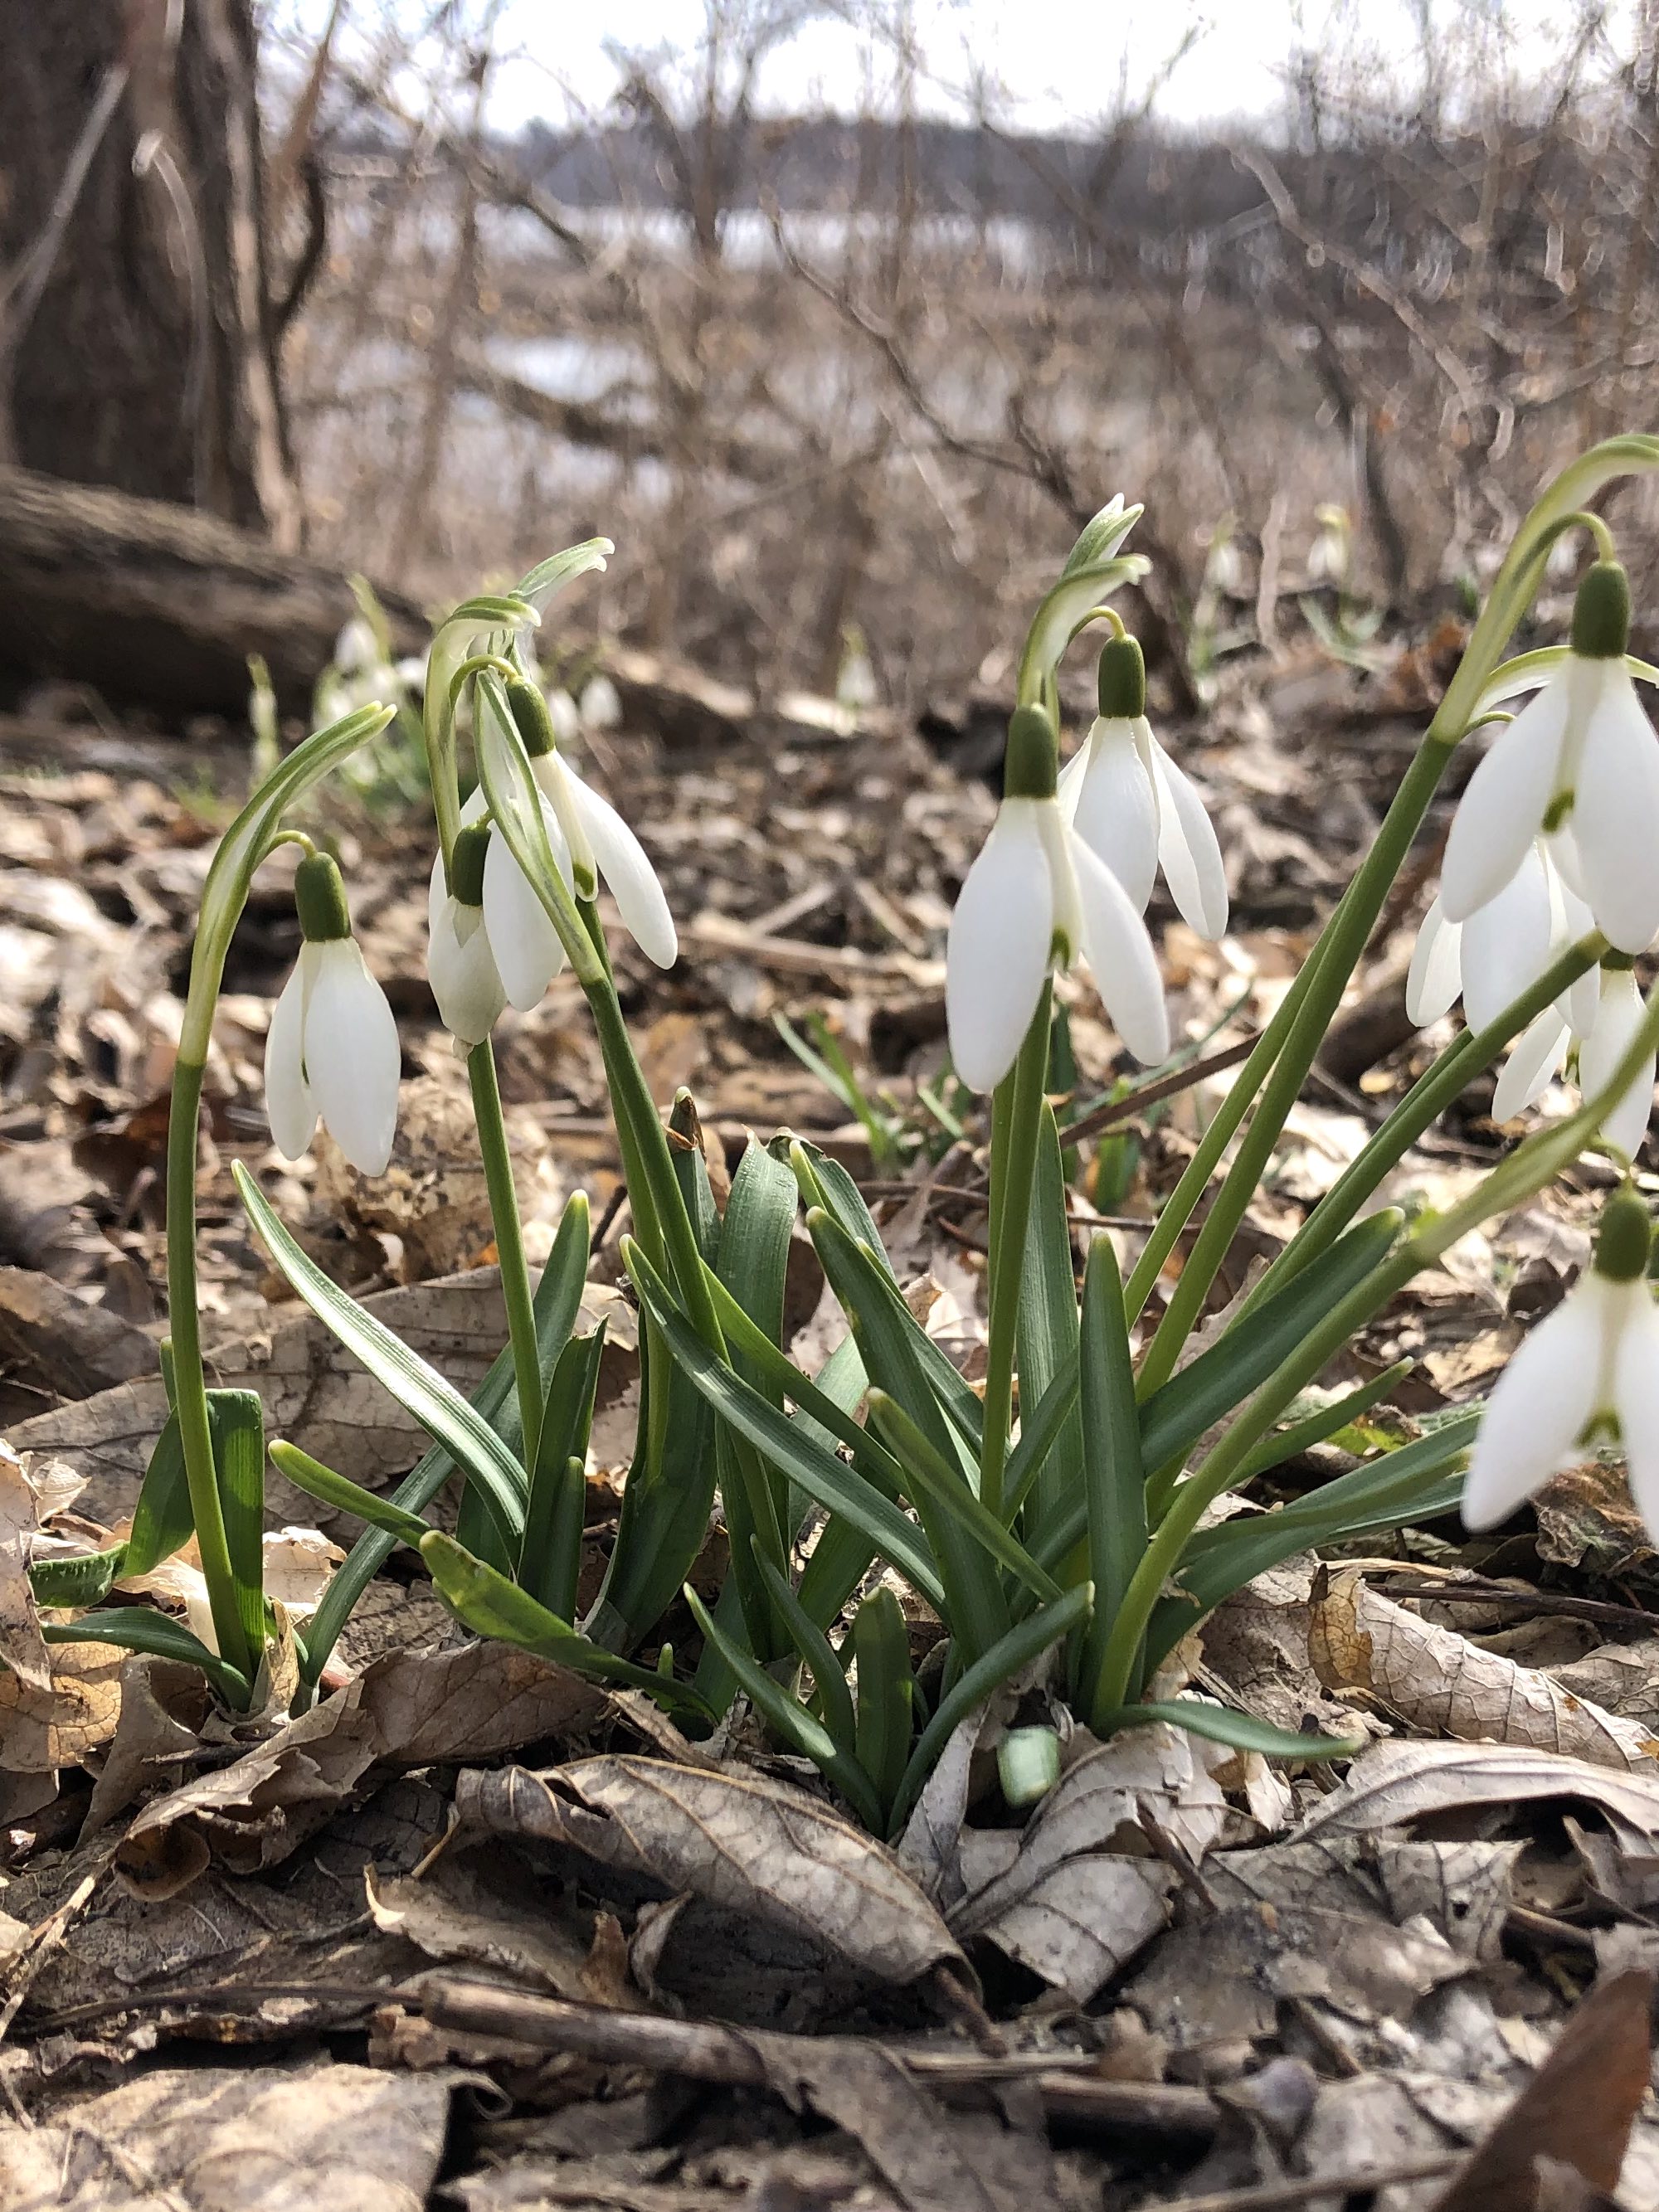 Snowdrops in Madison Wisconsin along Arbor Drive on March 8, 2023.